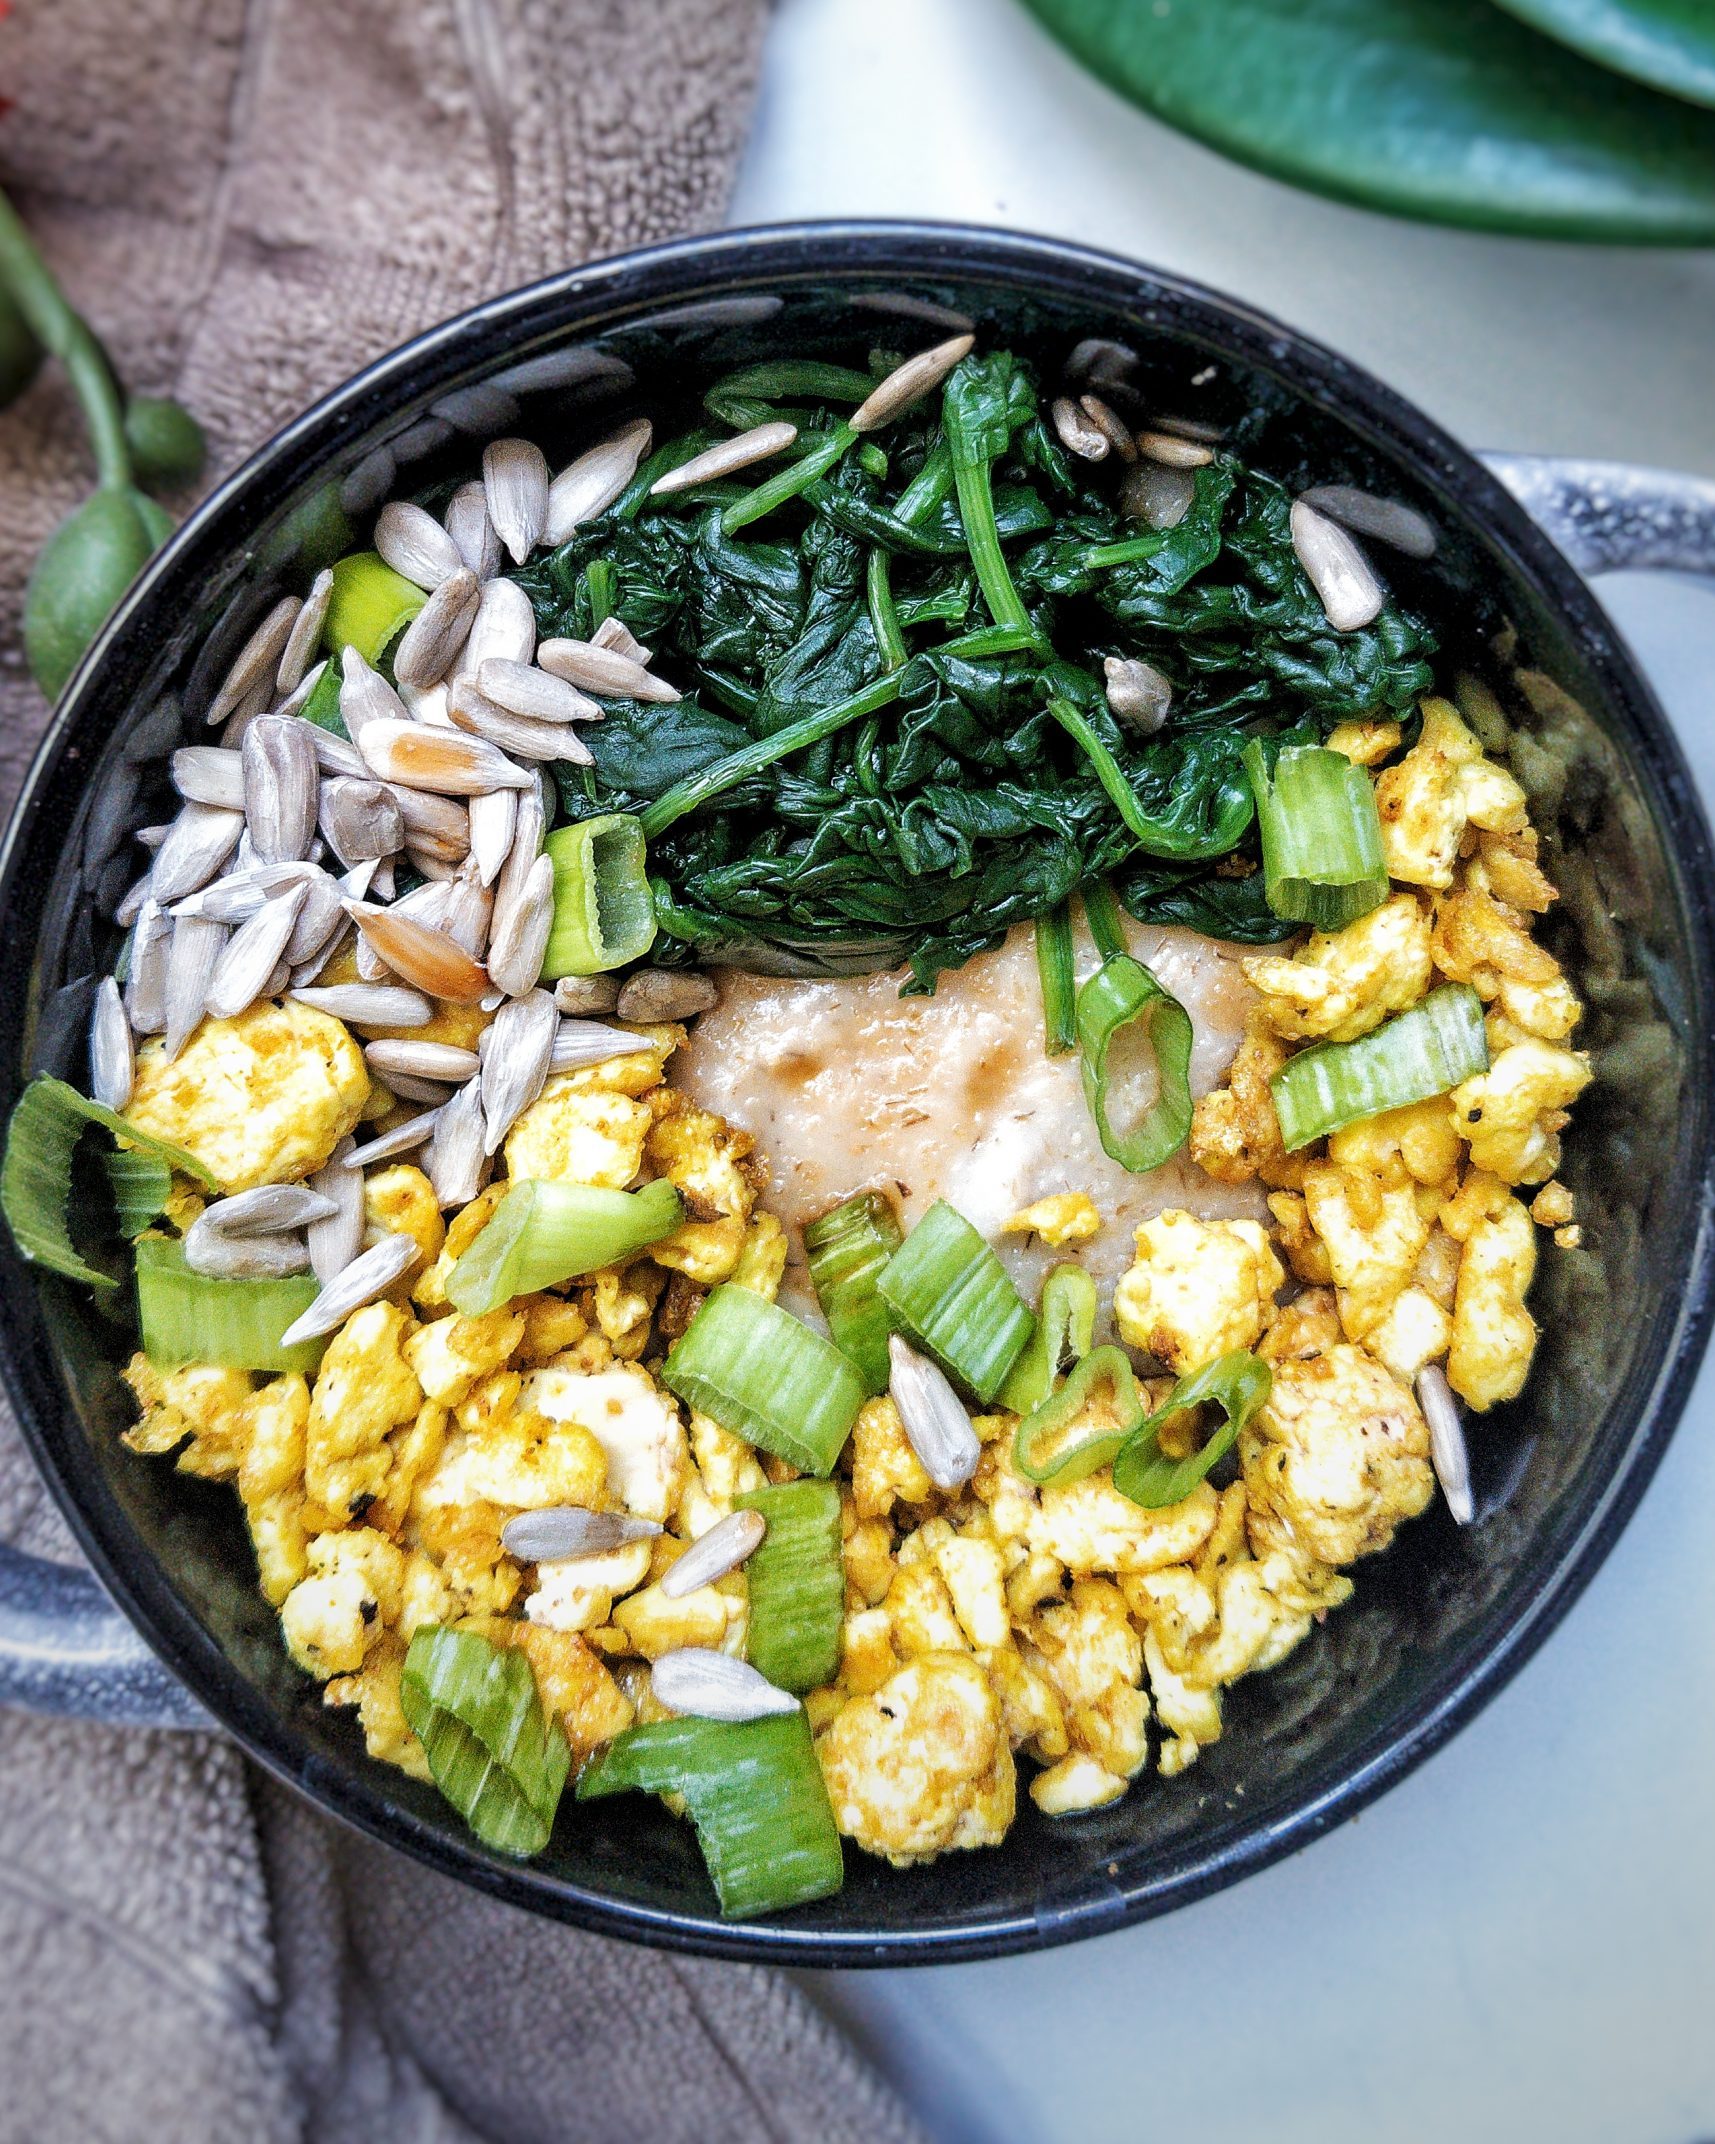 Bowl of creamy oat bran topped with tofu scramble, steamed spinach, sunflower seeds, chopped green onions, and a drizzle of soy sauce